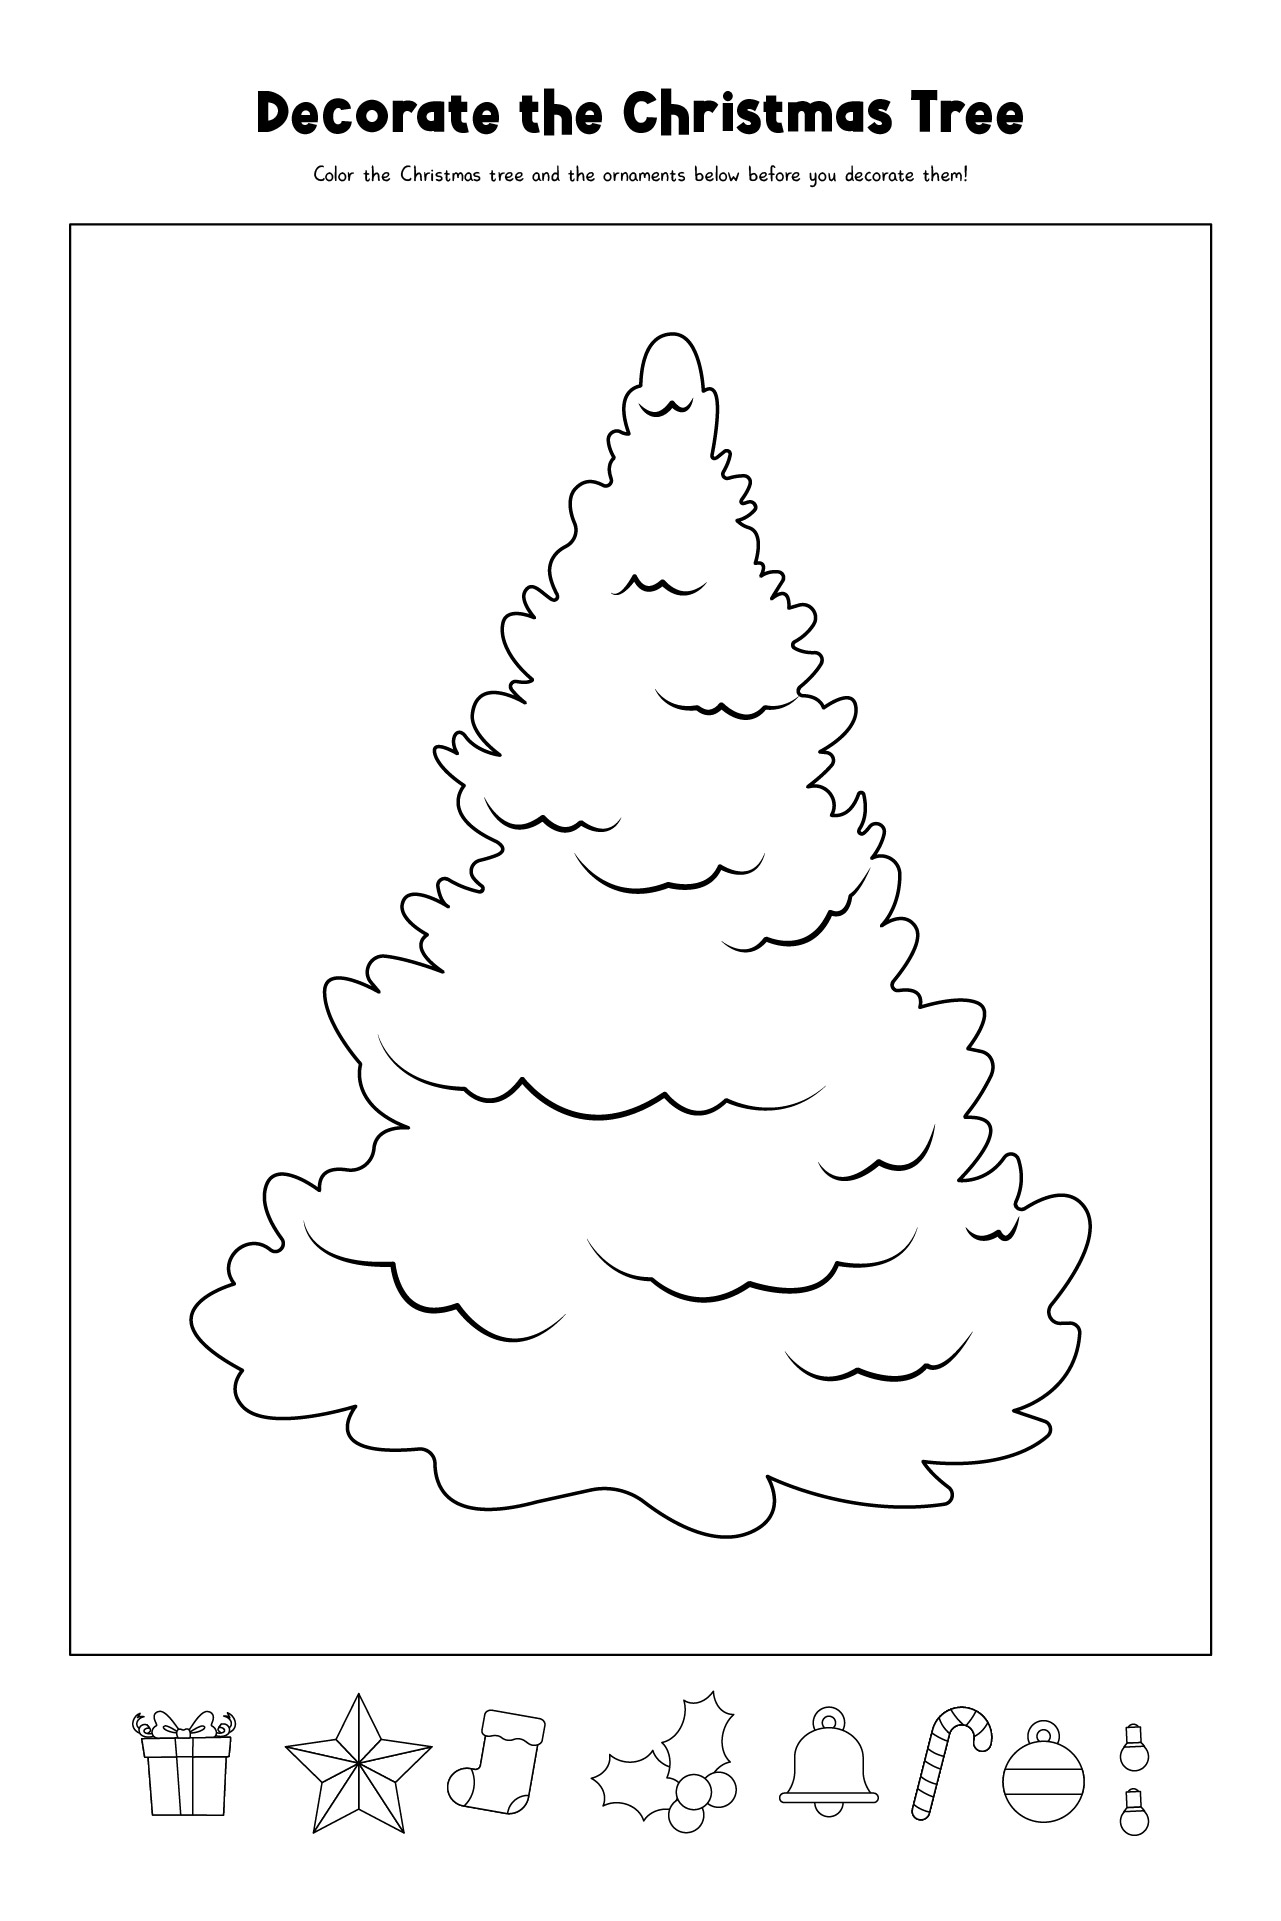 Printable Paper Christmas Tree Template & Coloring Page